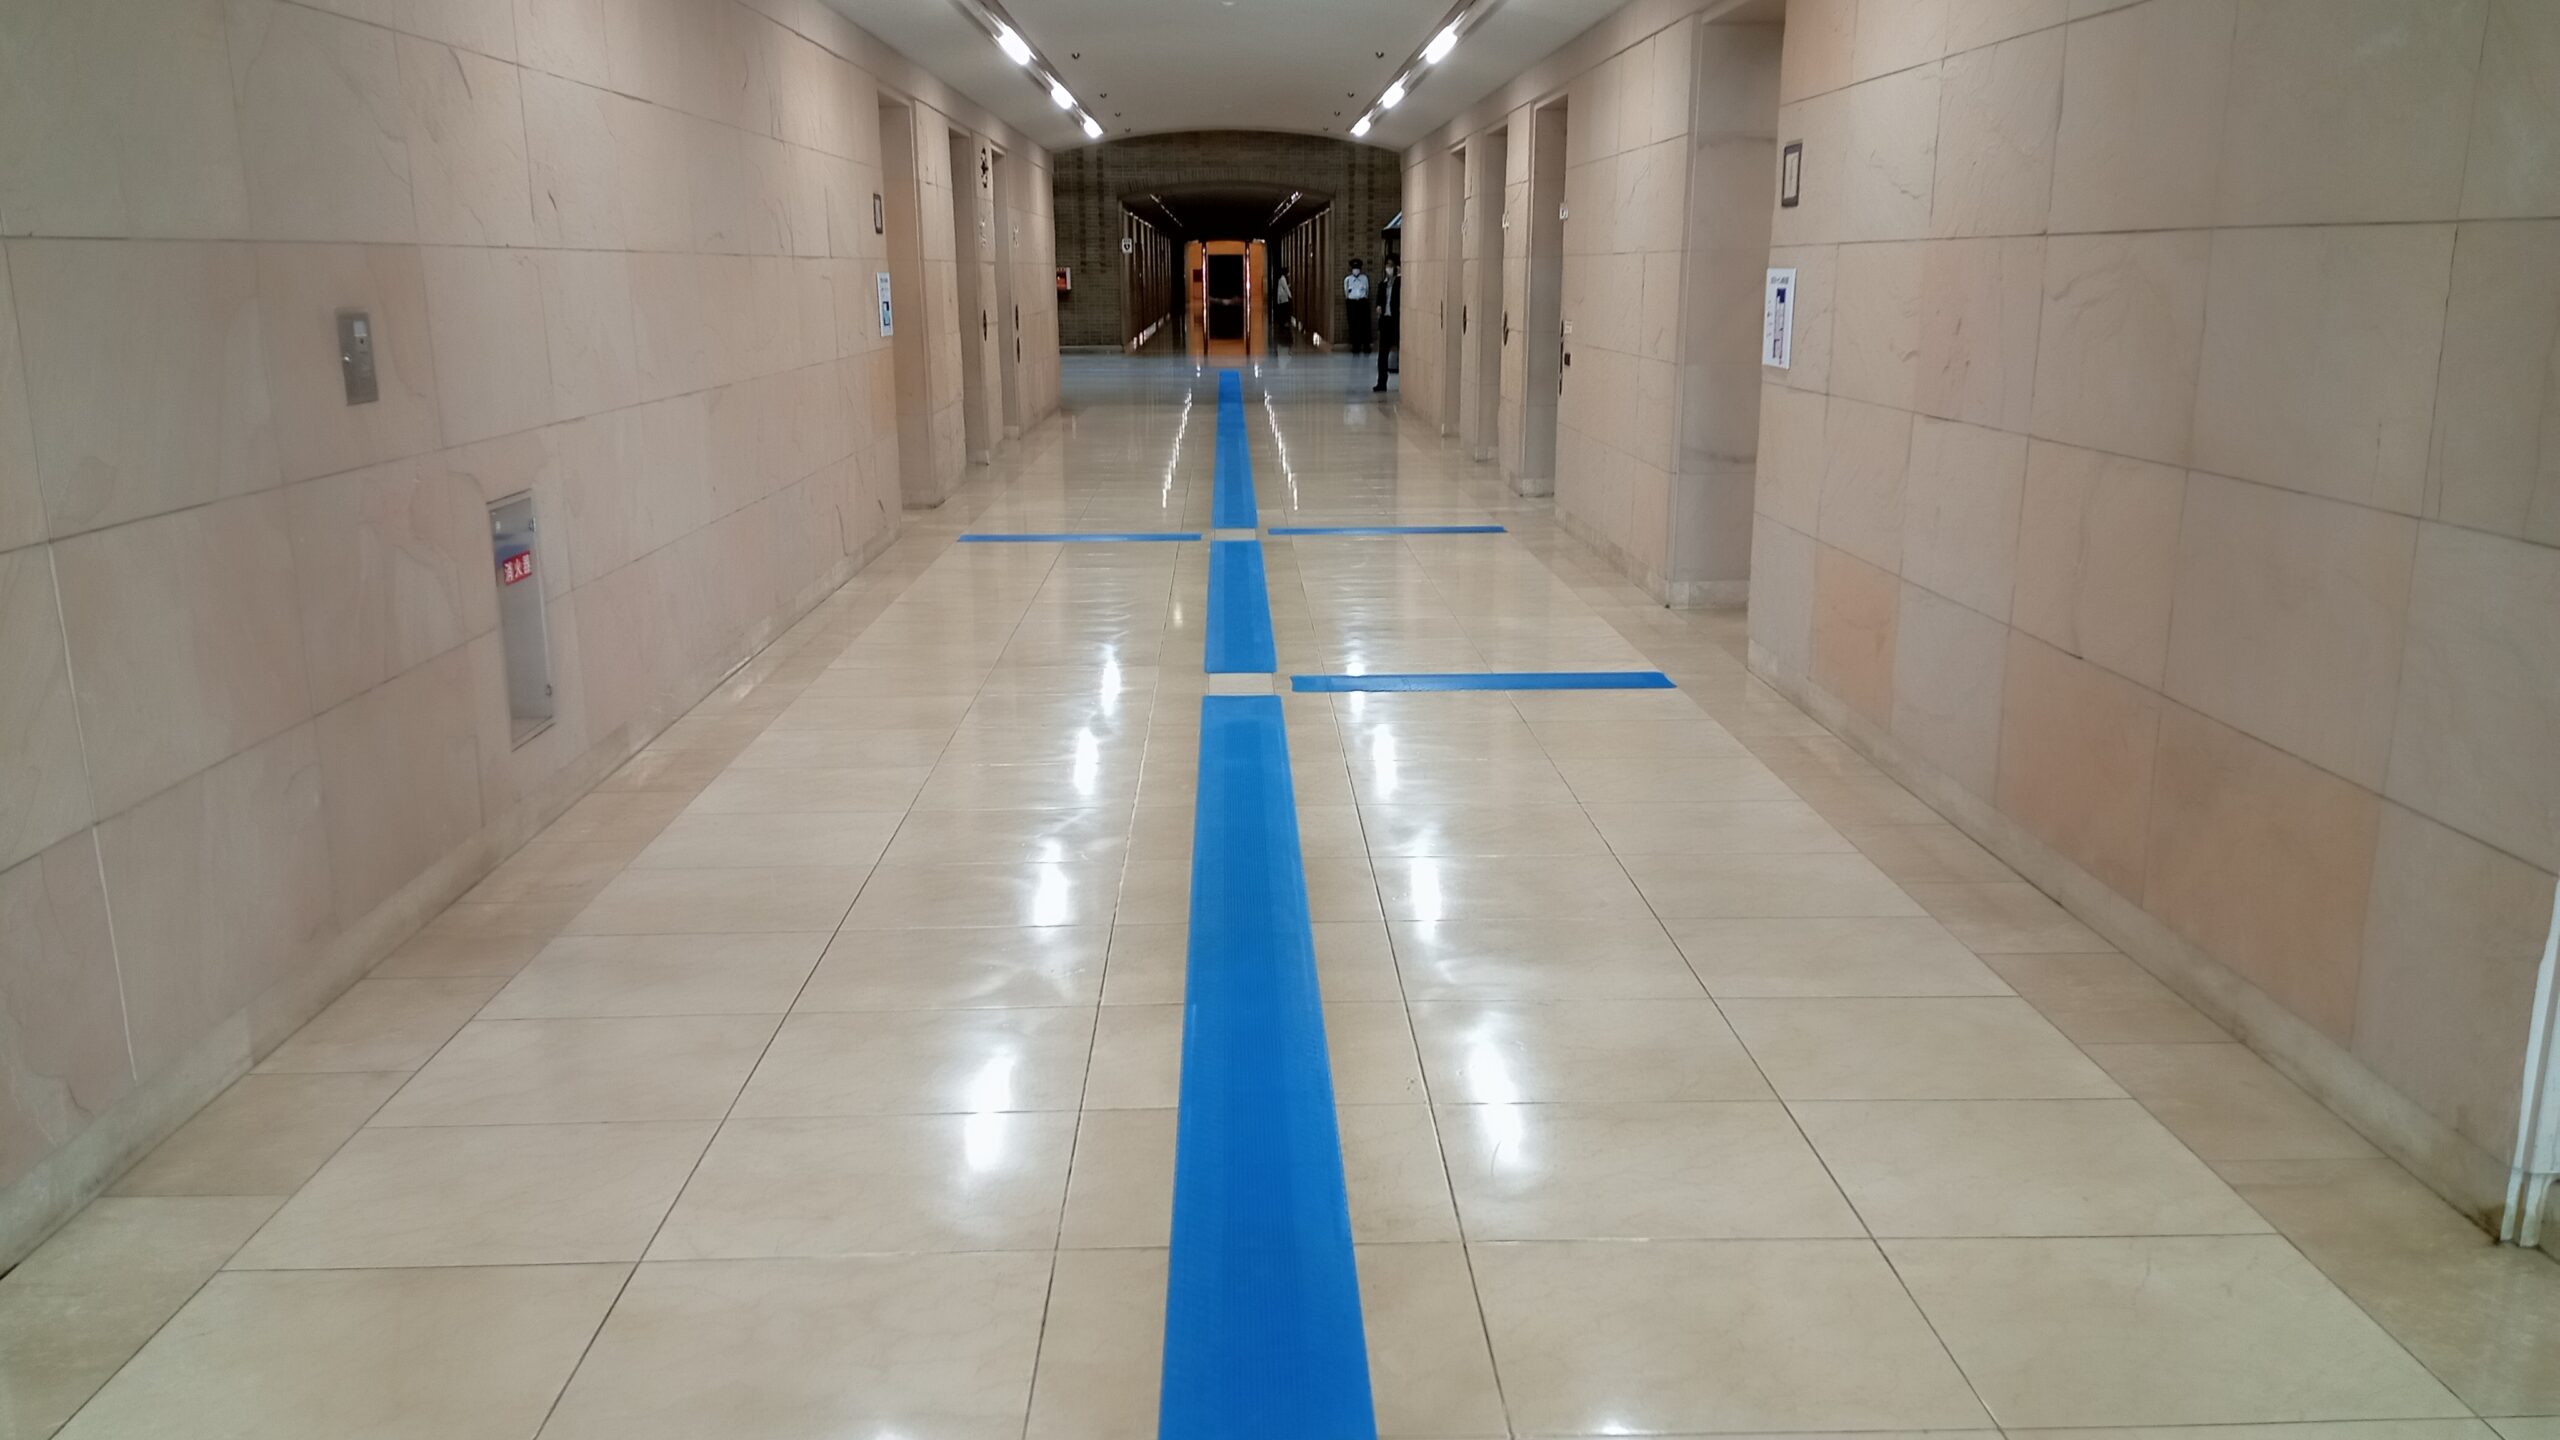 A blue hodokun has been installed in the centre of a wide corridor and is used to guide people to the toilets and lifts.